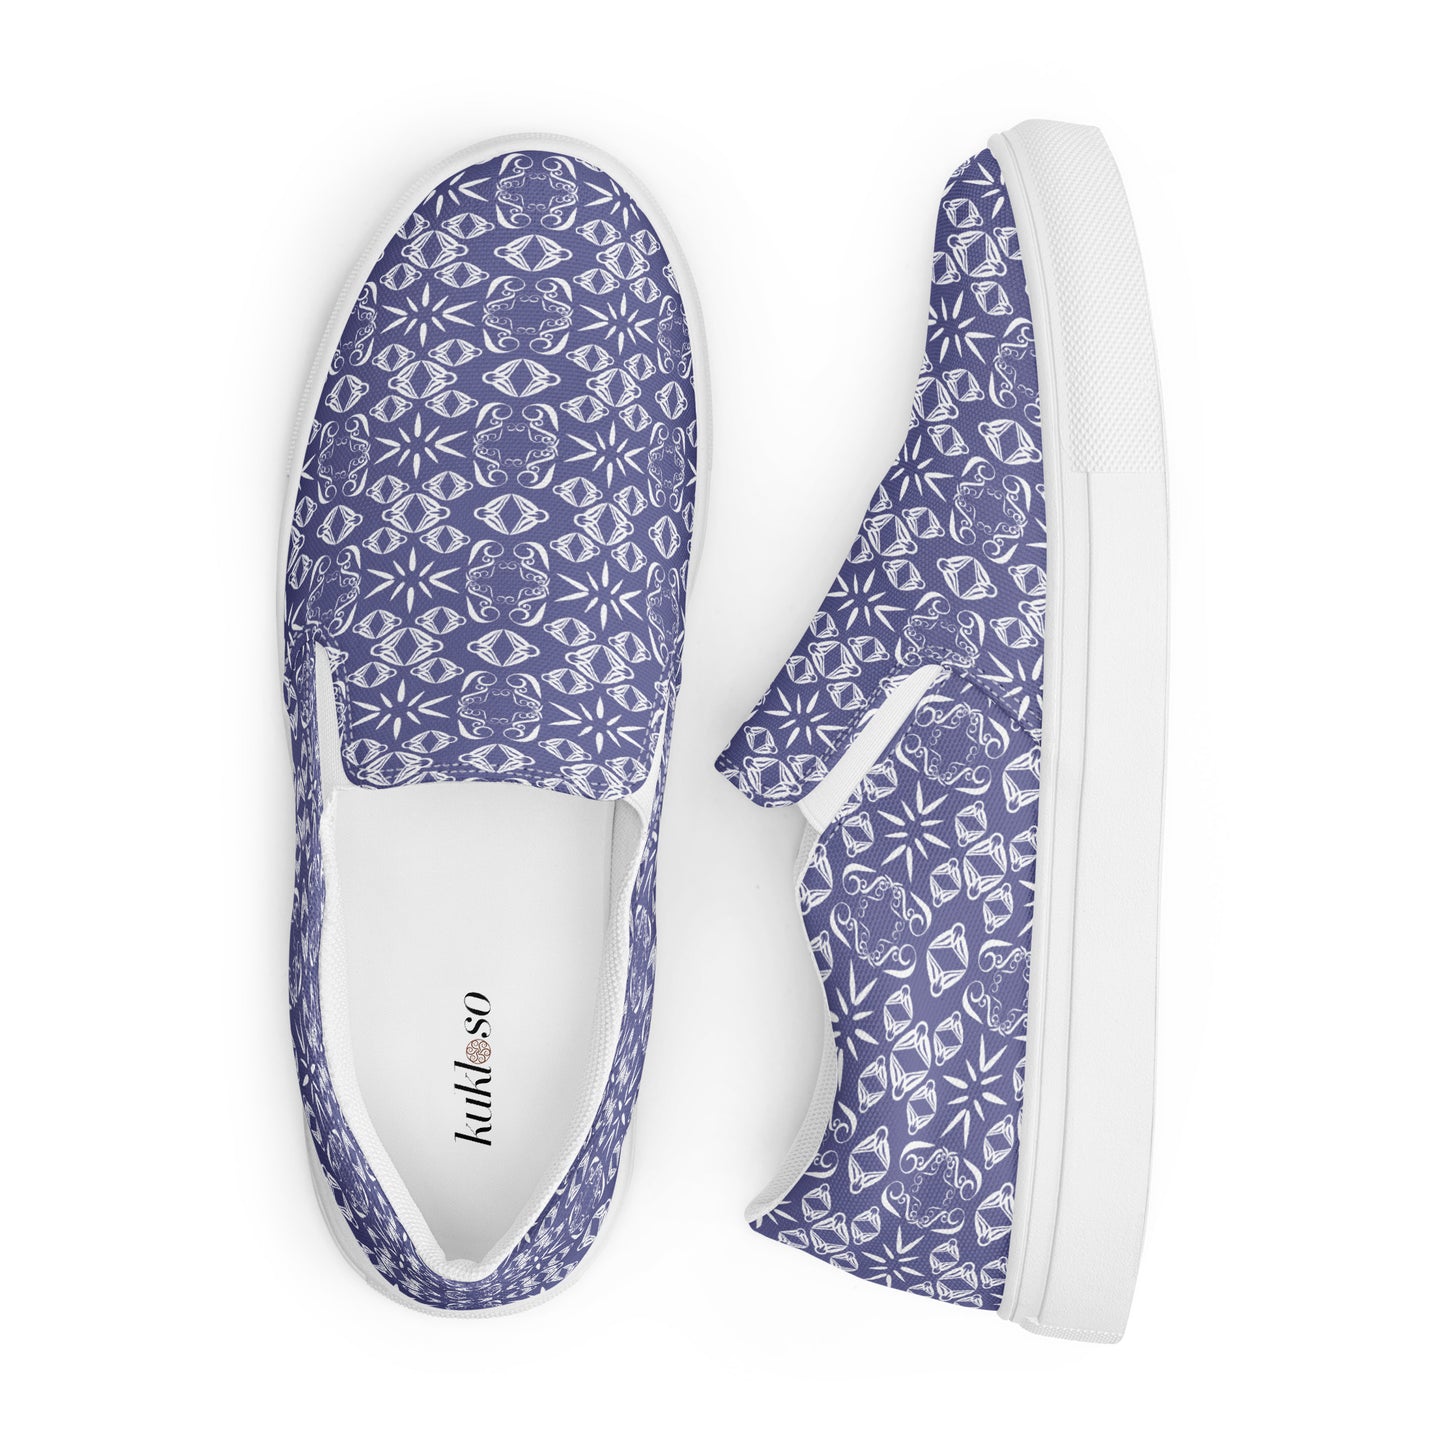 Women’s slip-on canvas shoes Kukloso Abstractical No 43 - Free Shipping